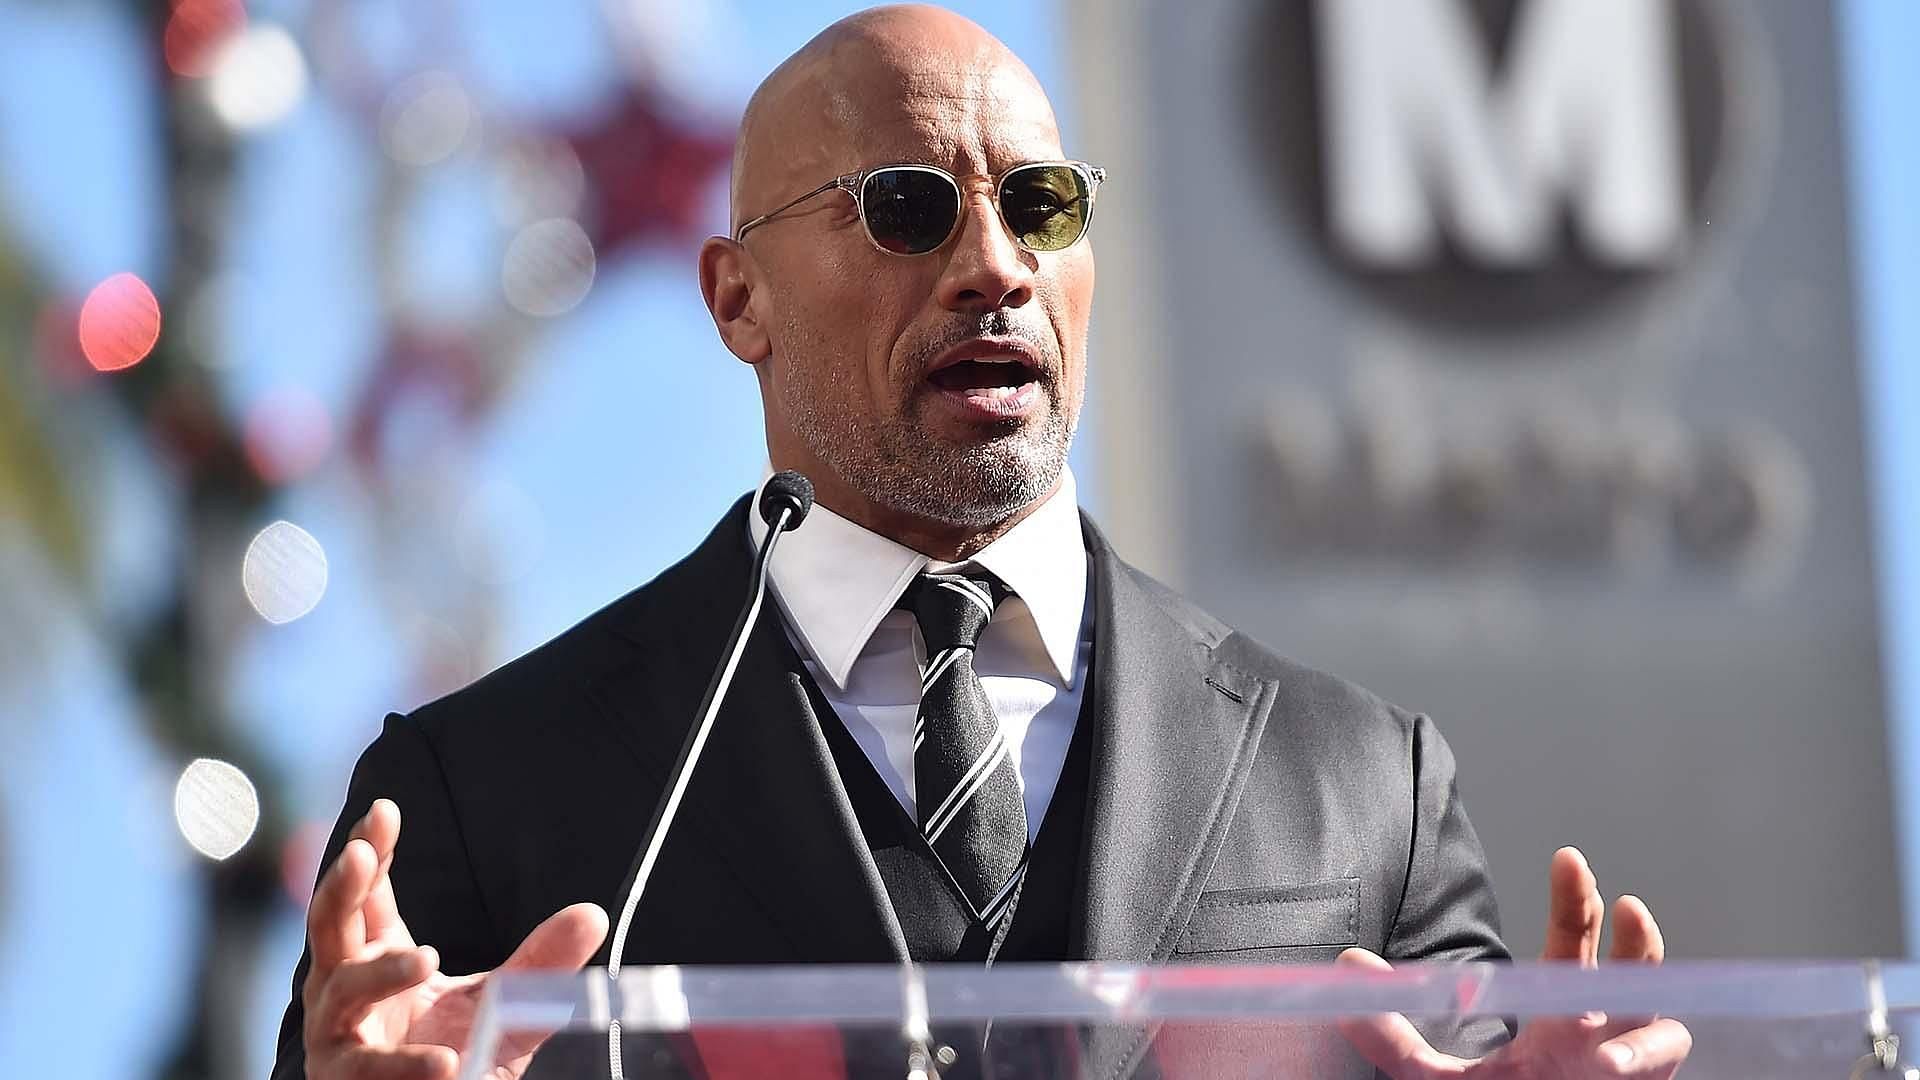 The Rock is arguably one of the greatest attractions in WWE